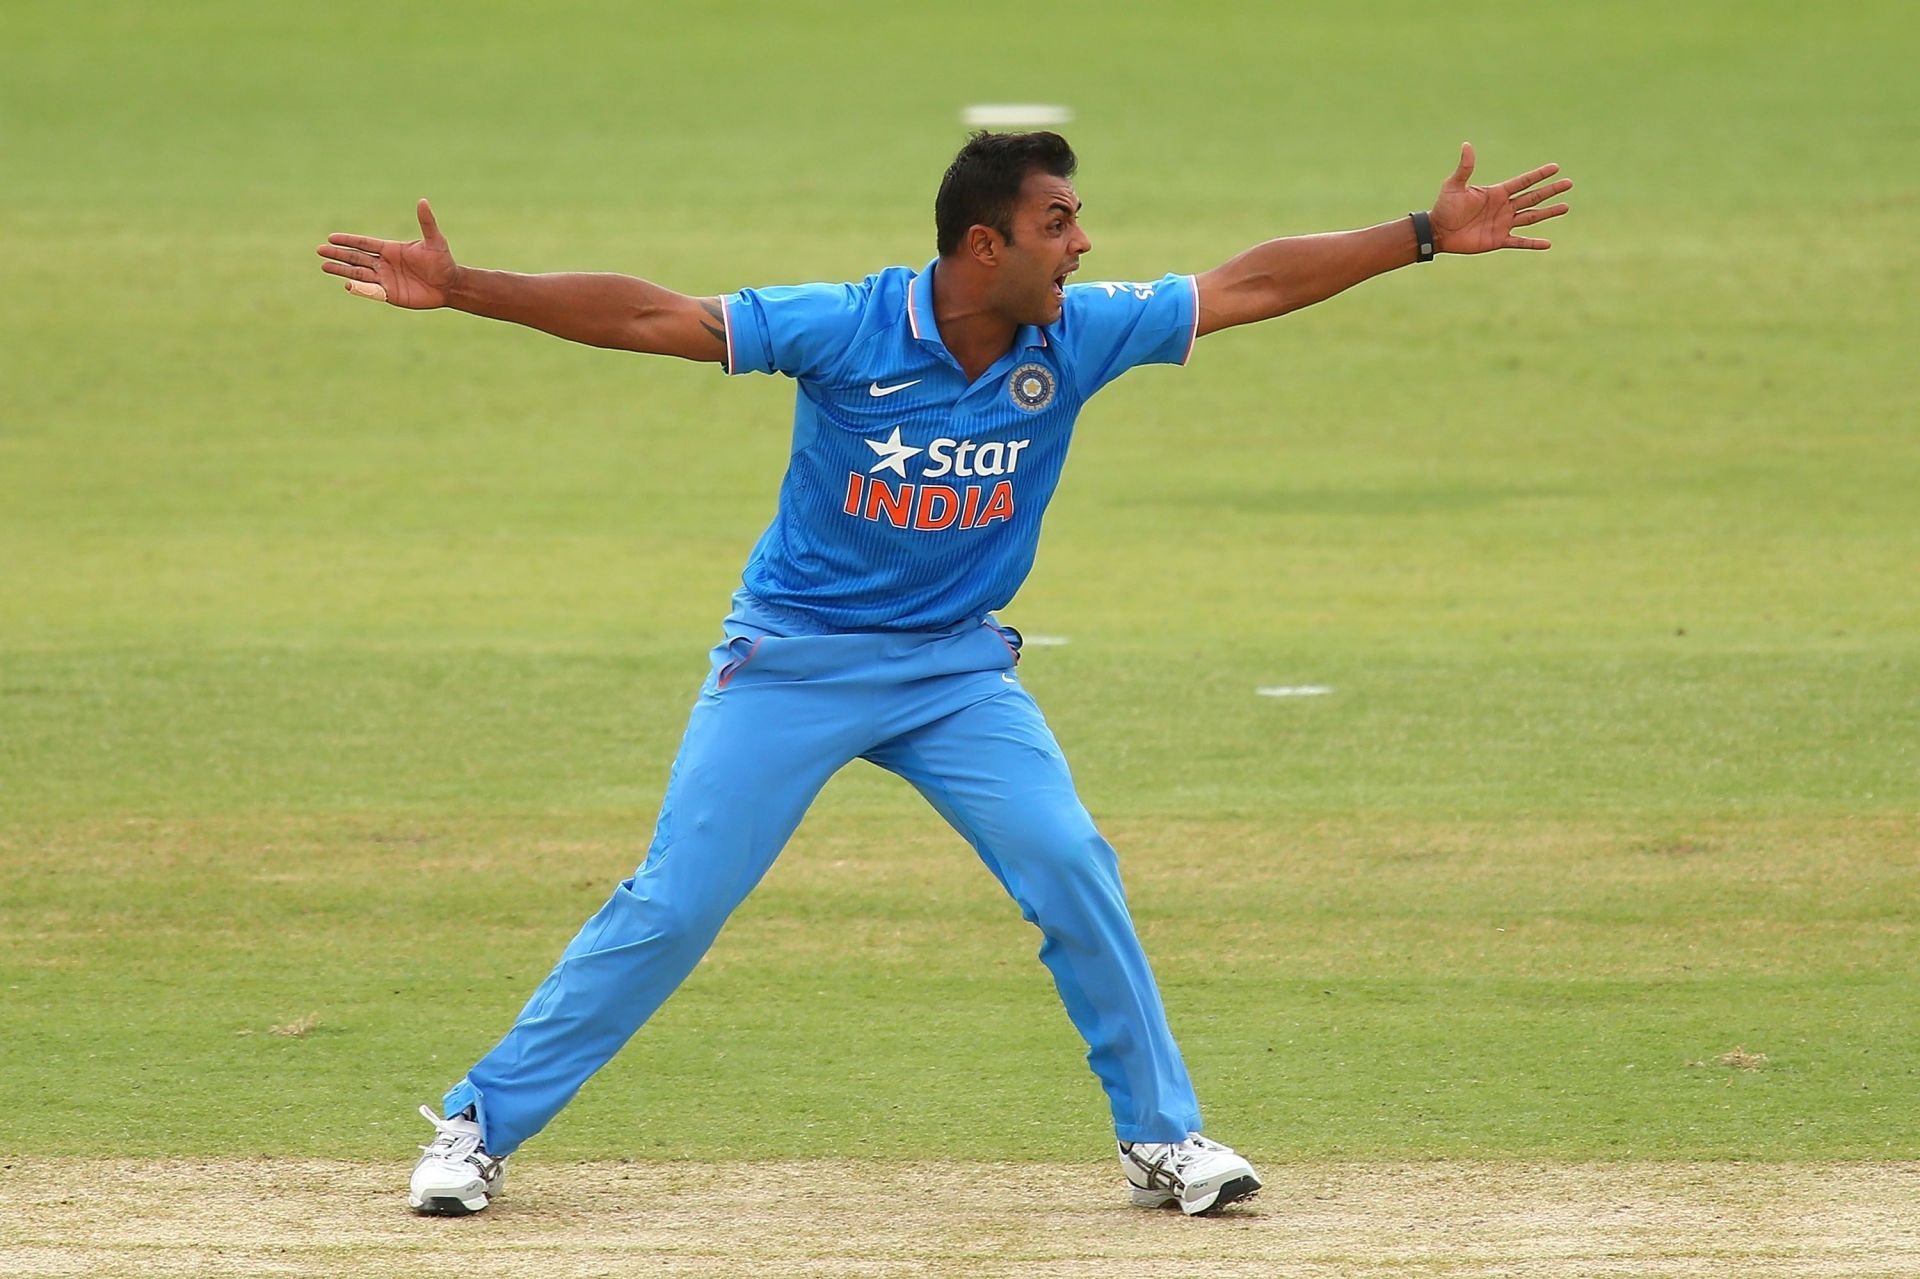 Stuart Binny could not cement his place in the Indian Cricket Team for his inconsitent performances